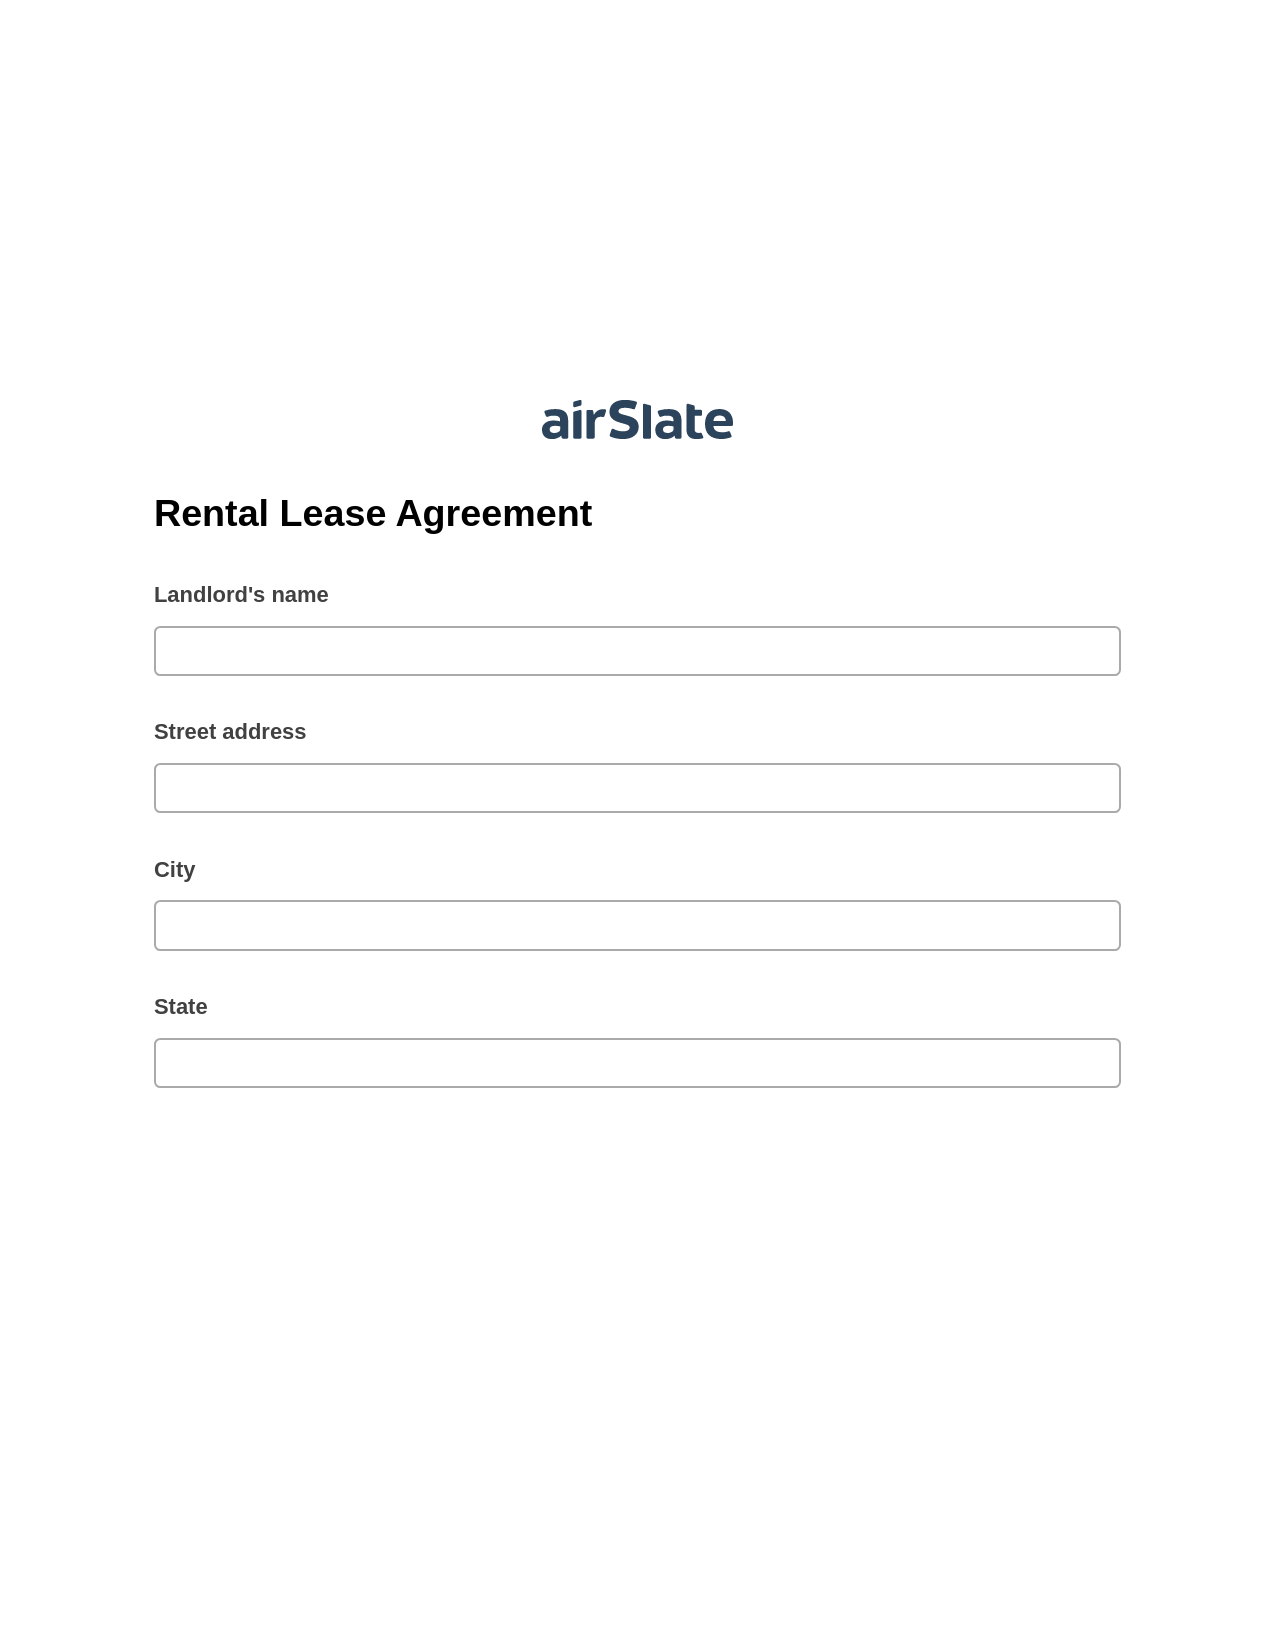 Rental Lease Agreement Pre-fill from MySQL Dropdown Options Bot, Google Cloud Print Bot, Export to Formstack Documents Bot